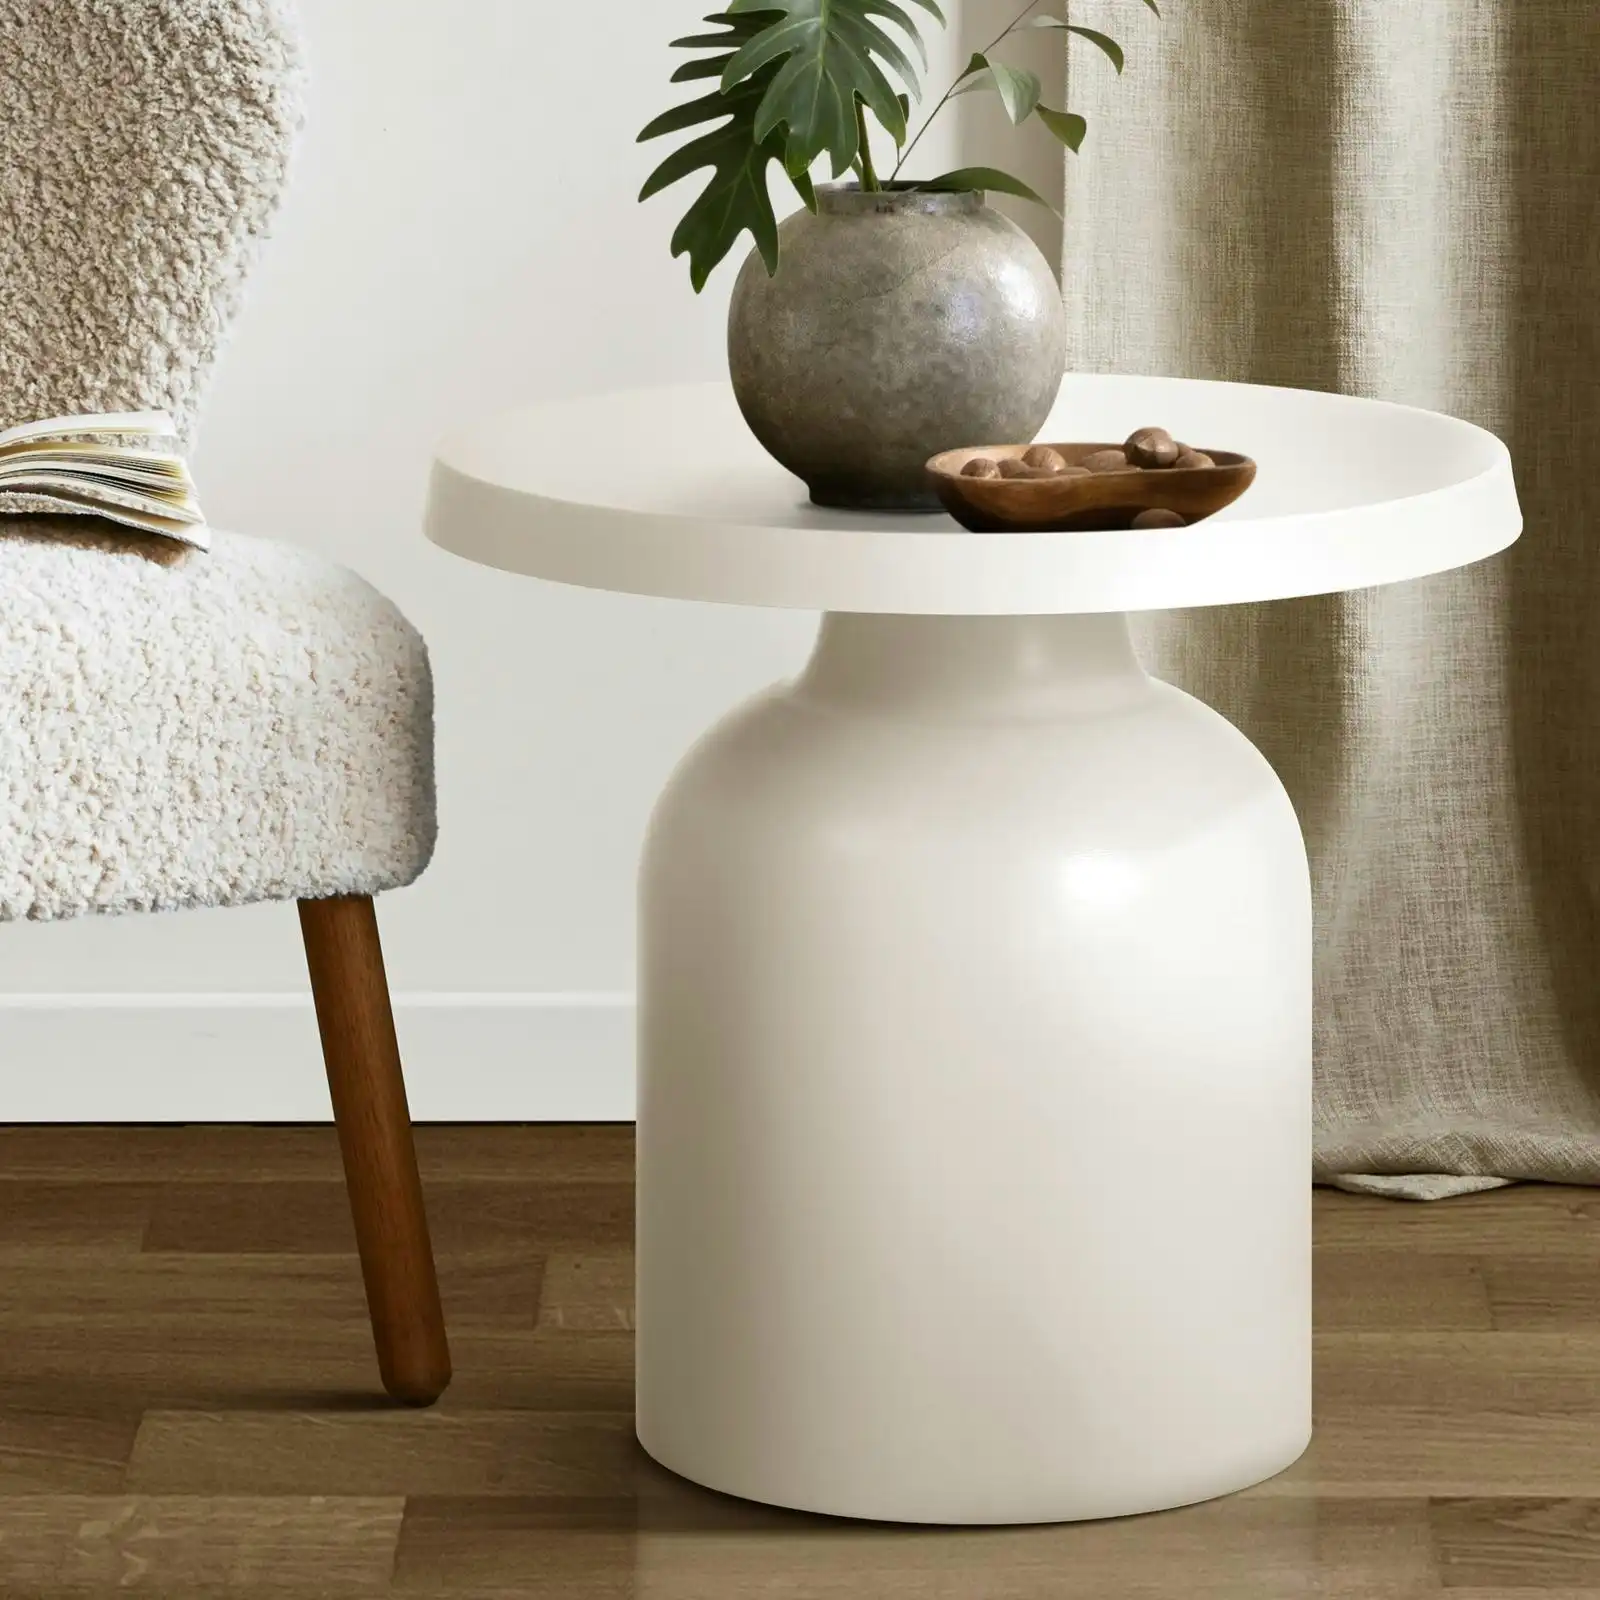 Oikiture Coffee Side Table Round Bedside Sofa Tea End Tables Steel Metal White